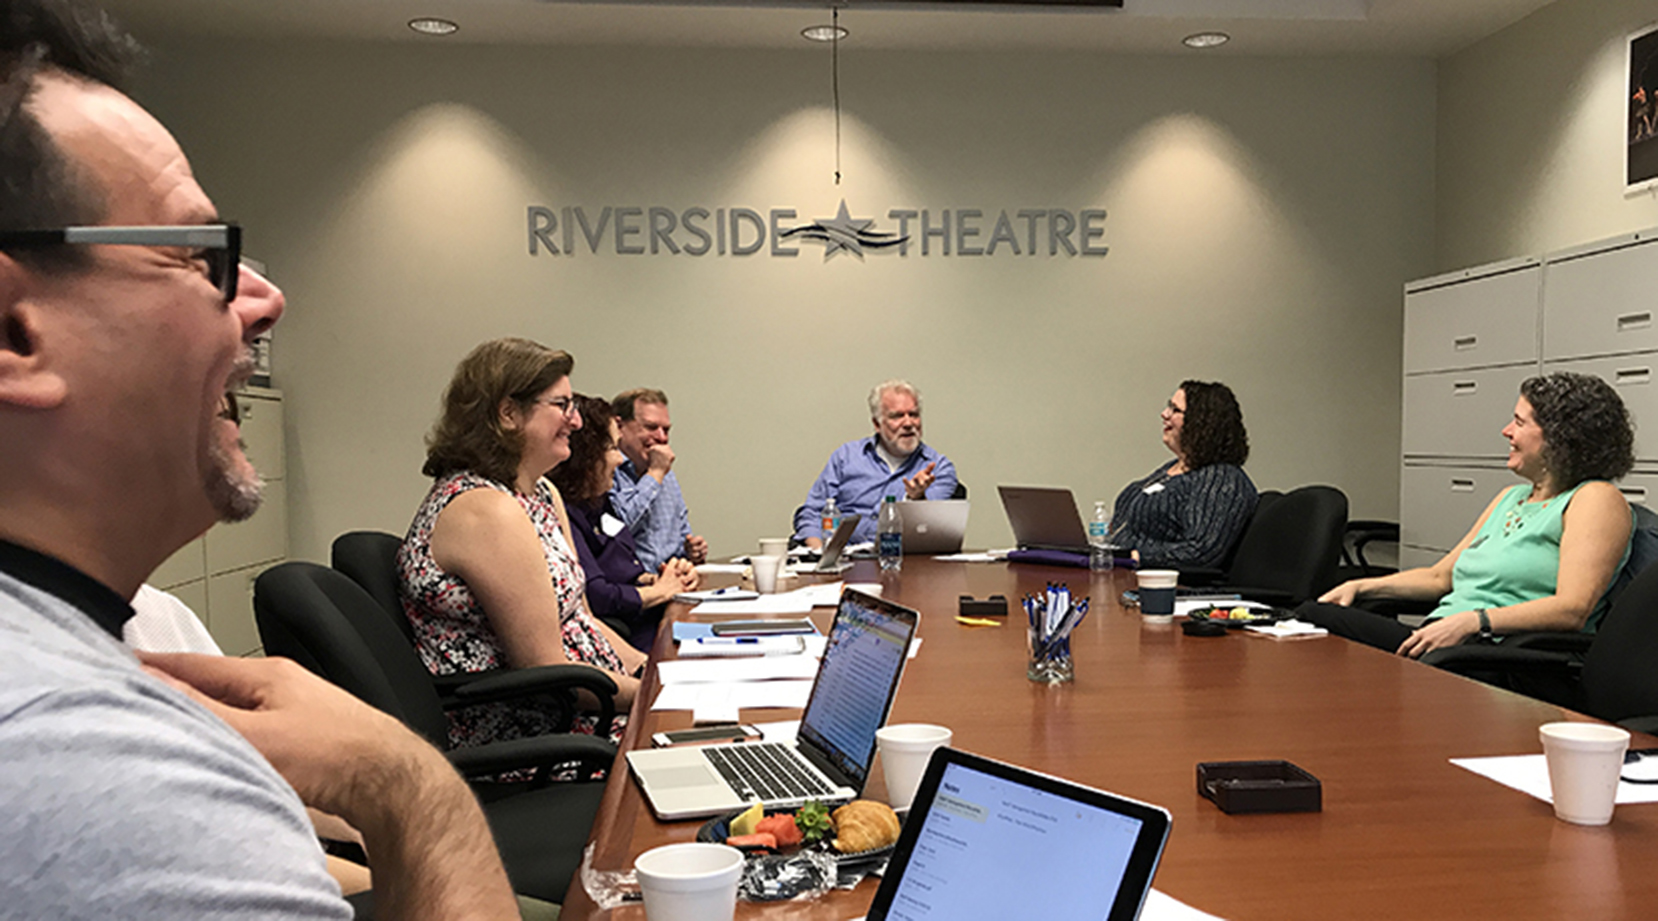 NAMT leads educational roundtables on a variety of management and community engagement topics, hosted by our member theatres around the country.